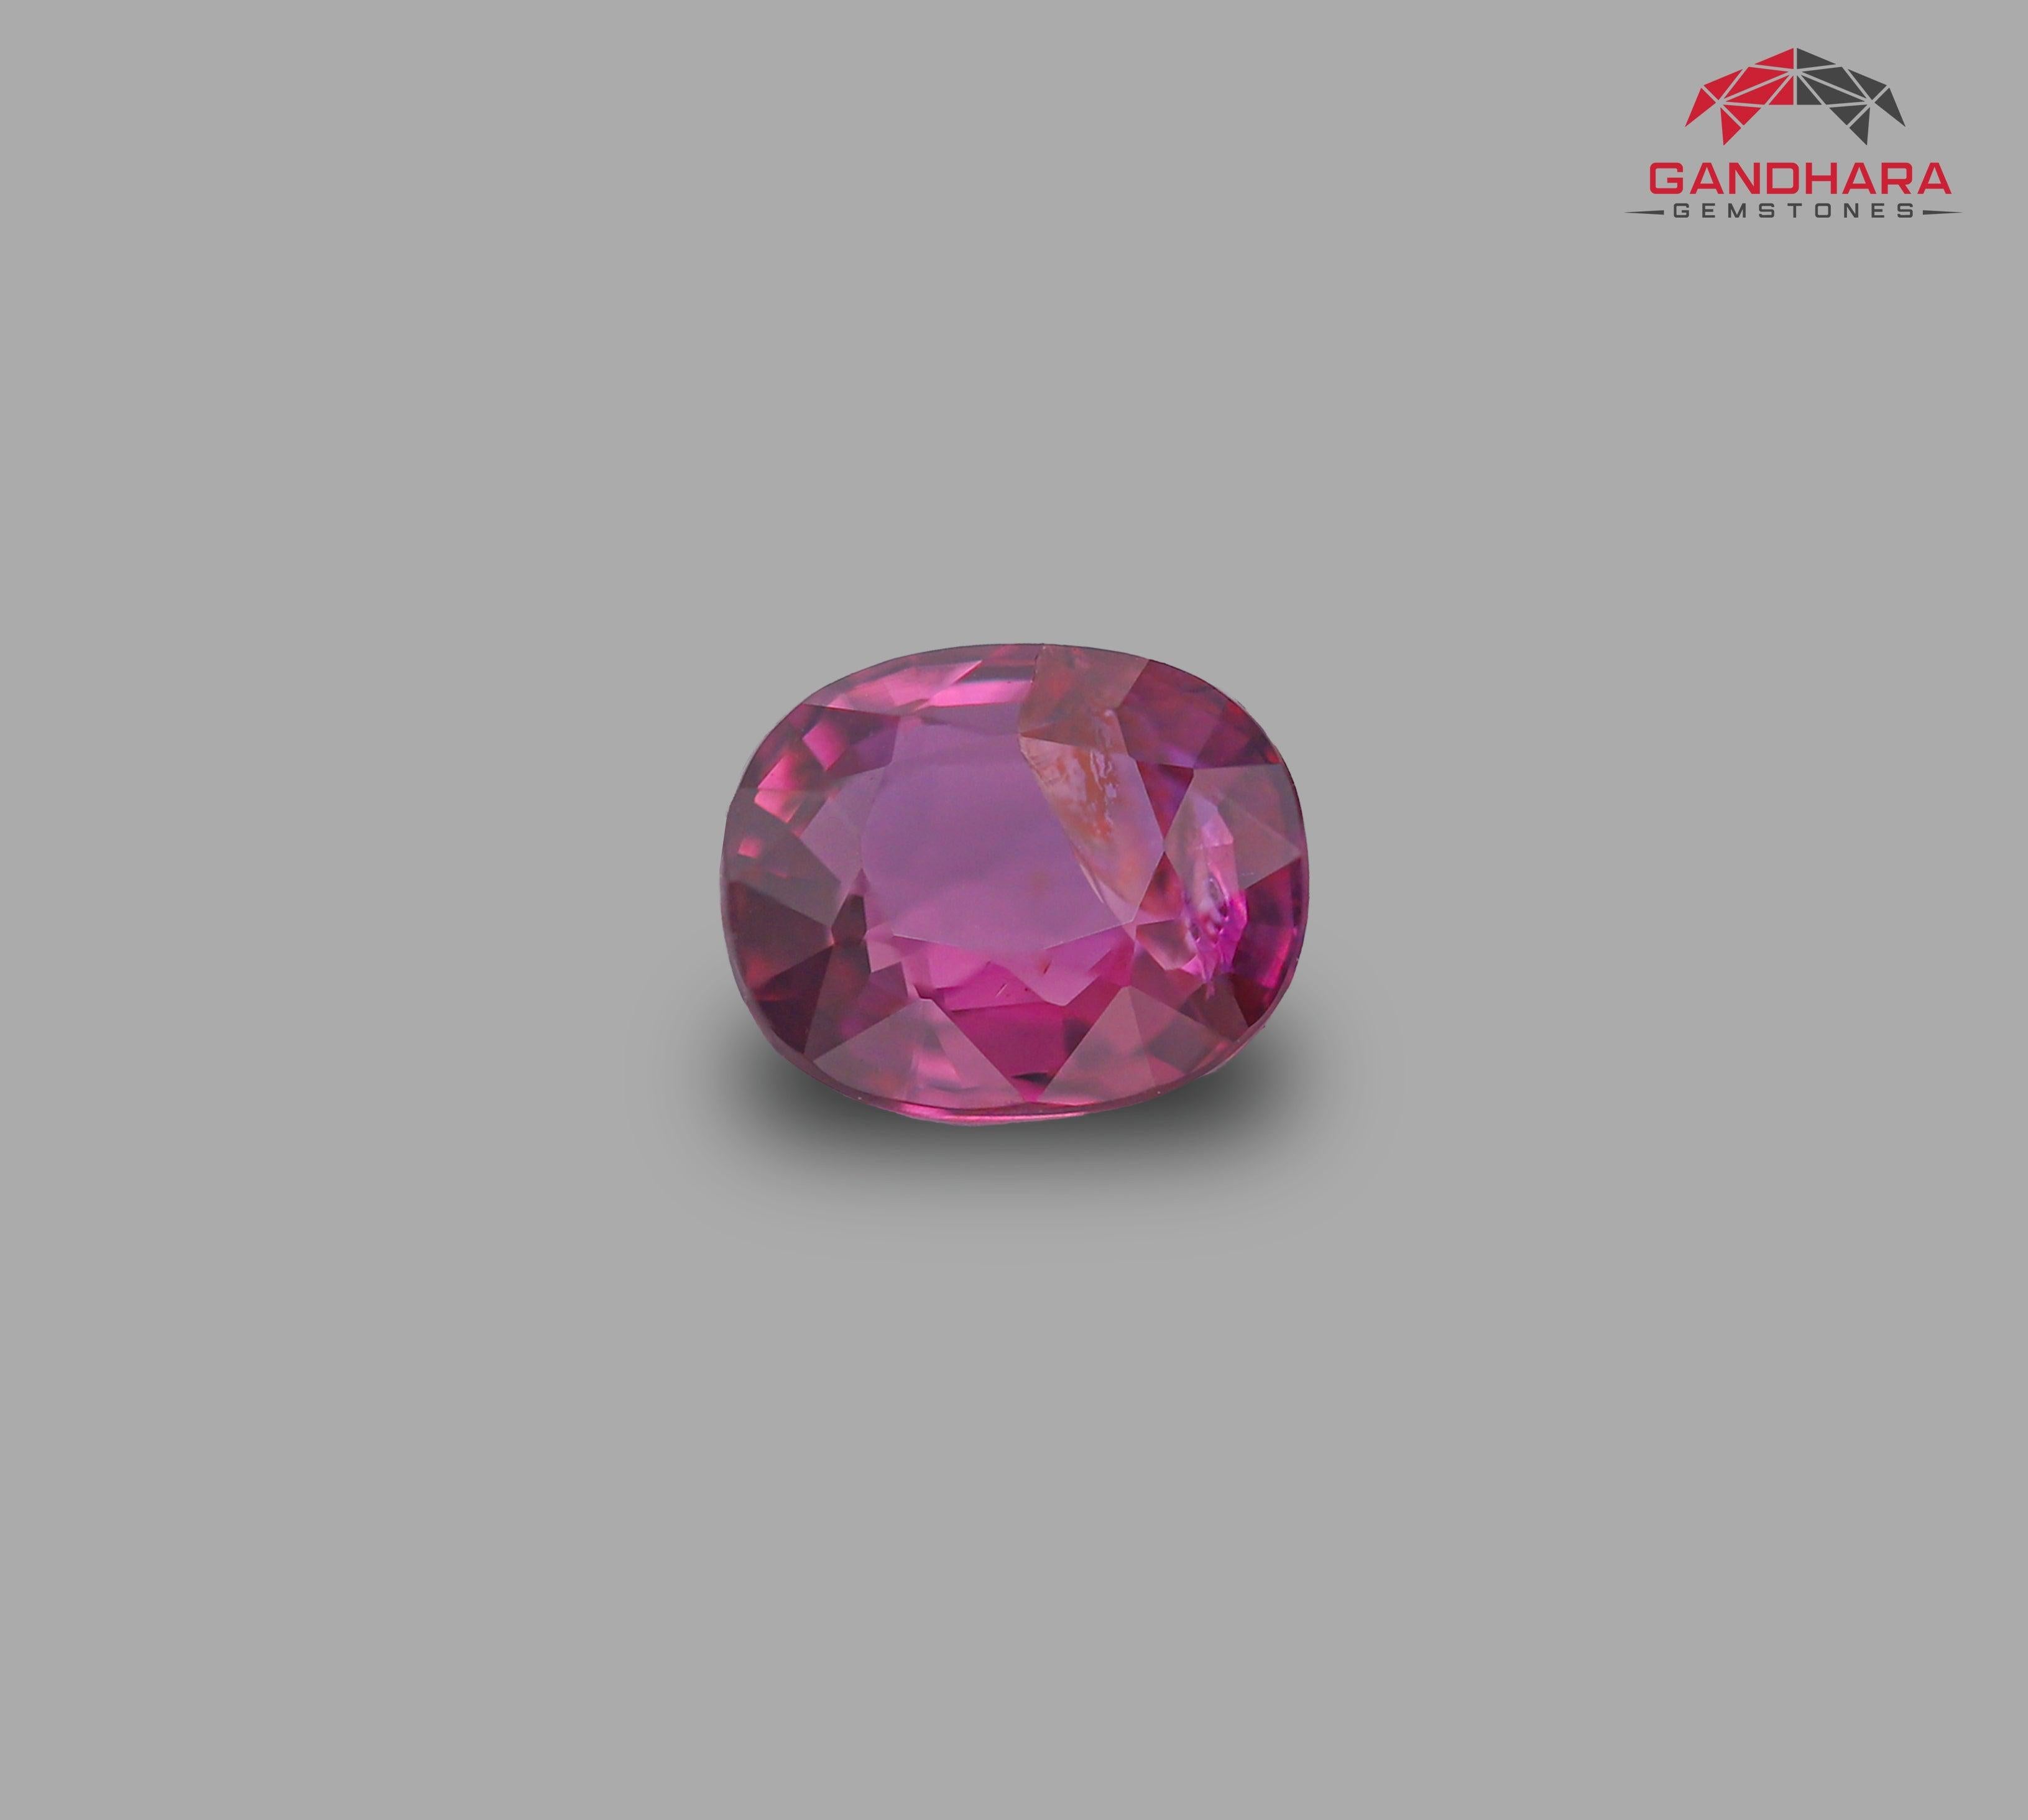 This Lustrous Natural Ruby of 1.09 carats from Mozambique has a wonderful cut in a Cushion shape, incredible red color. Great brilliance. This gem is totally SI Clarity. 

Product Information:
GEMSTONE TYPE	Lustrous Natural Ruby from